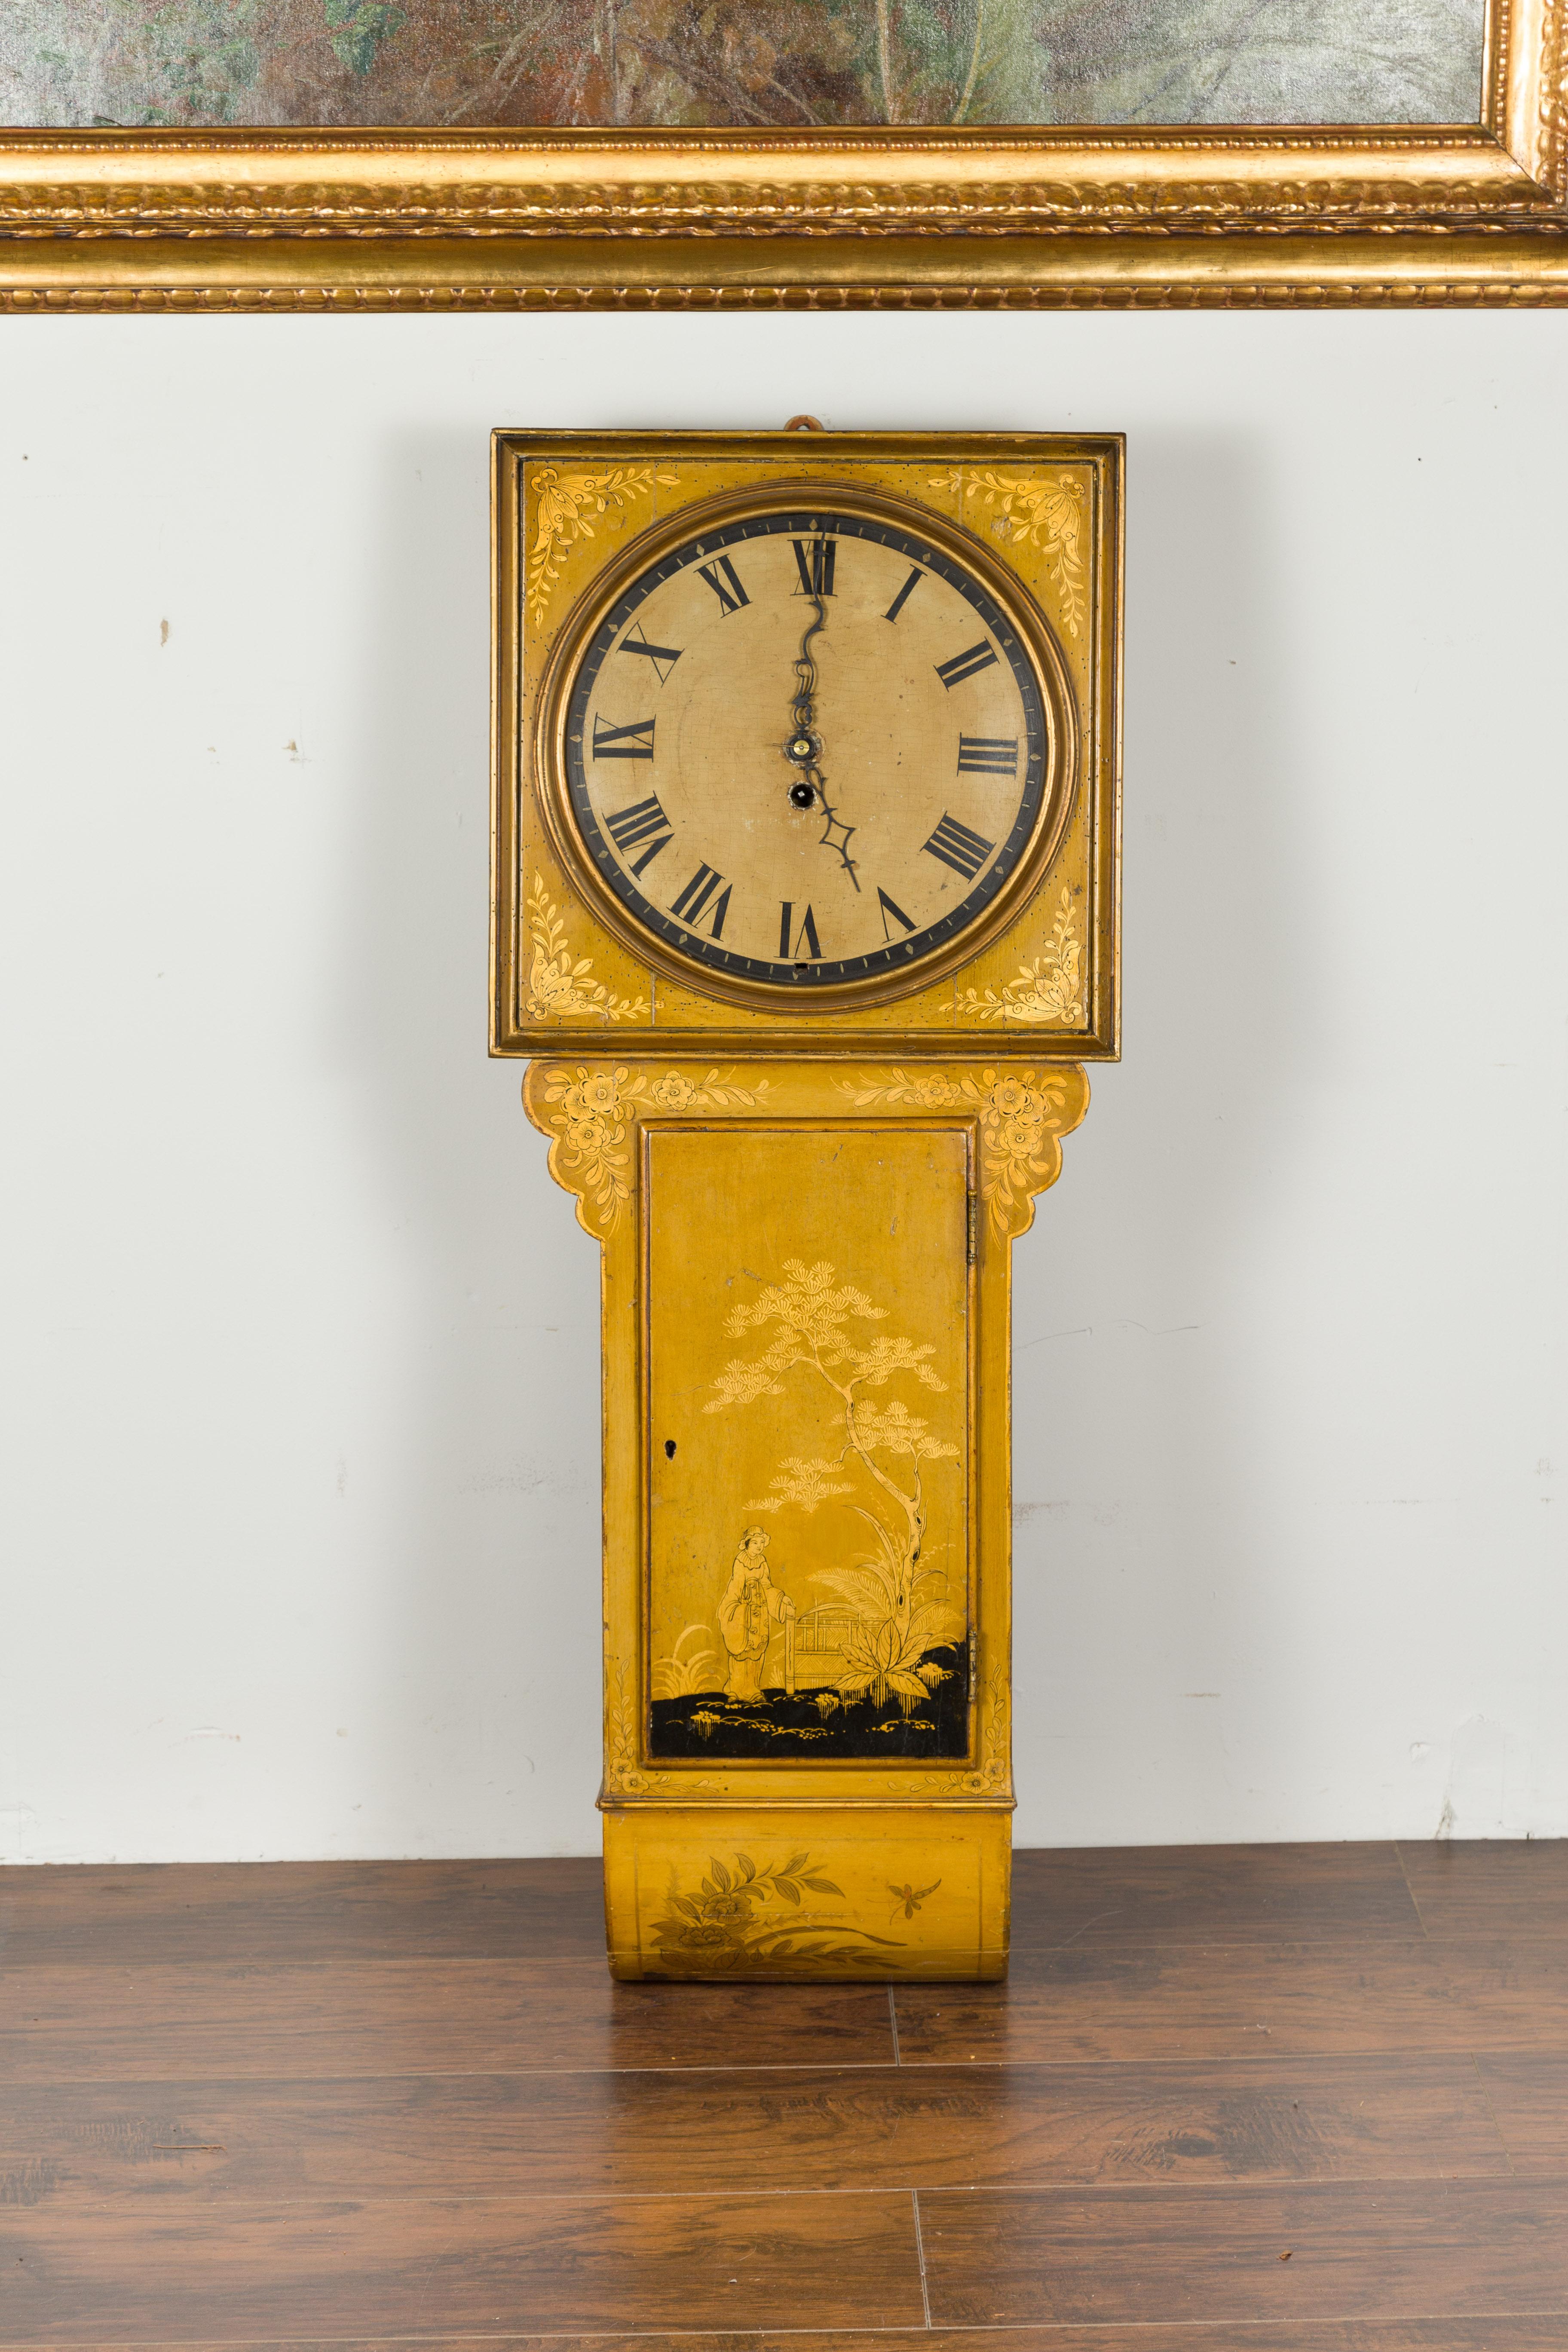 An English painted wood wall clock from the early 19th century, with chinoiserie motifs. Created in England at the end of the Regency period, this wall clock captures our attention with its golden tones and chinoiserie décor. The clock is topped